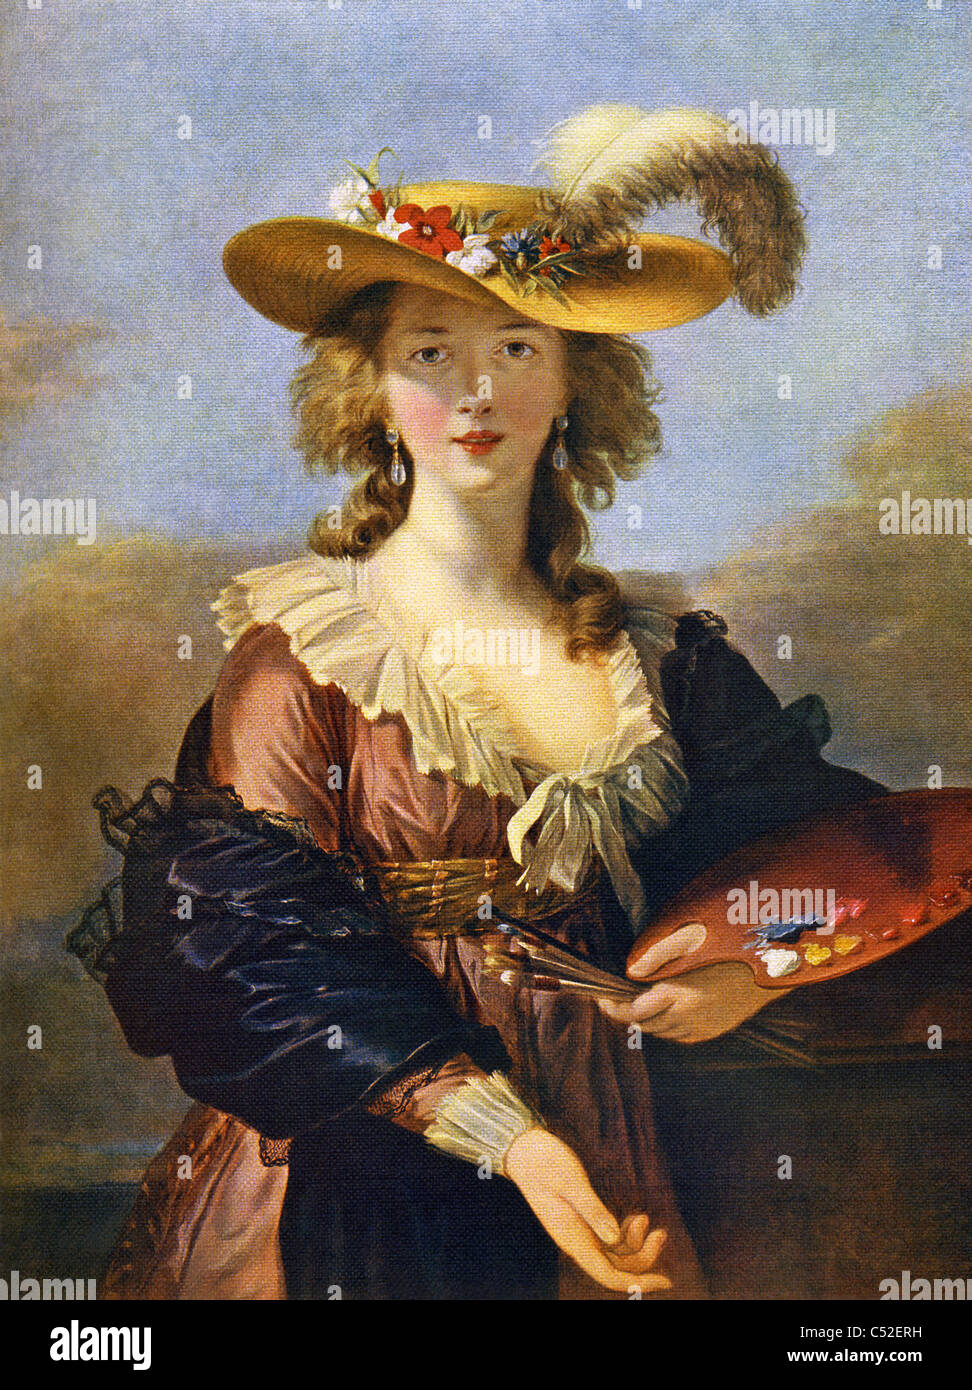 The painting, titled 'Portrait of the Artist,' is a self portrait by French painter Madame Elisabeth Louise Vigee Le Brun. Stock Photo